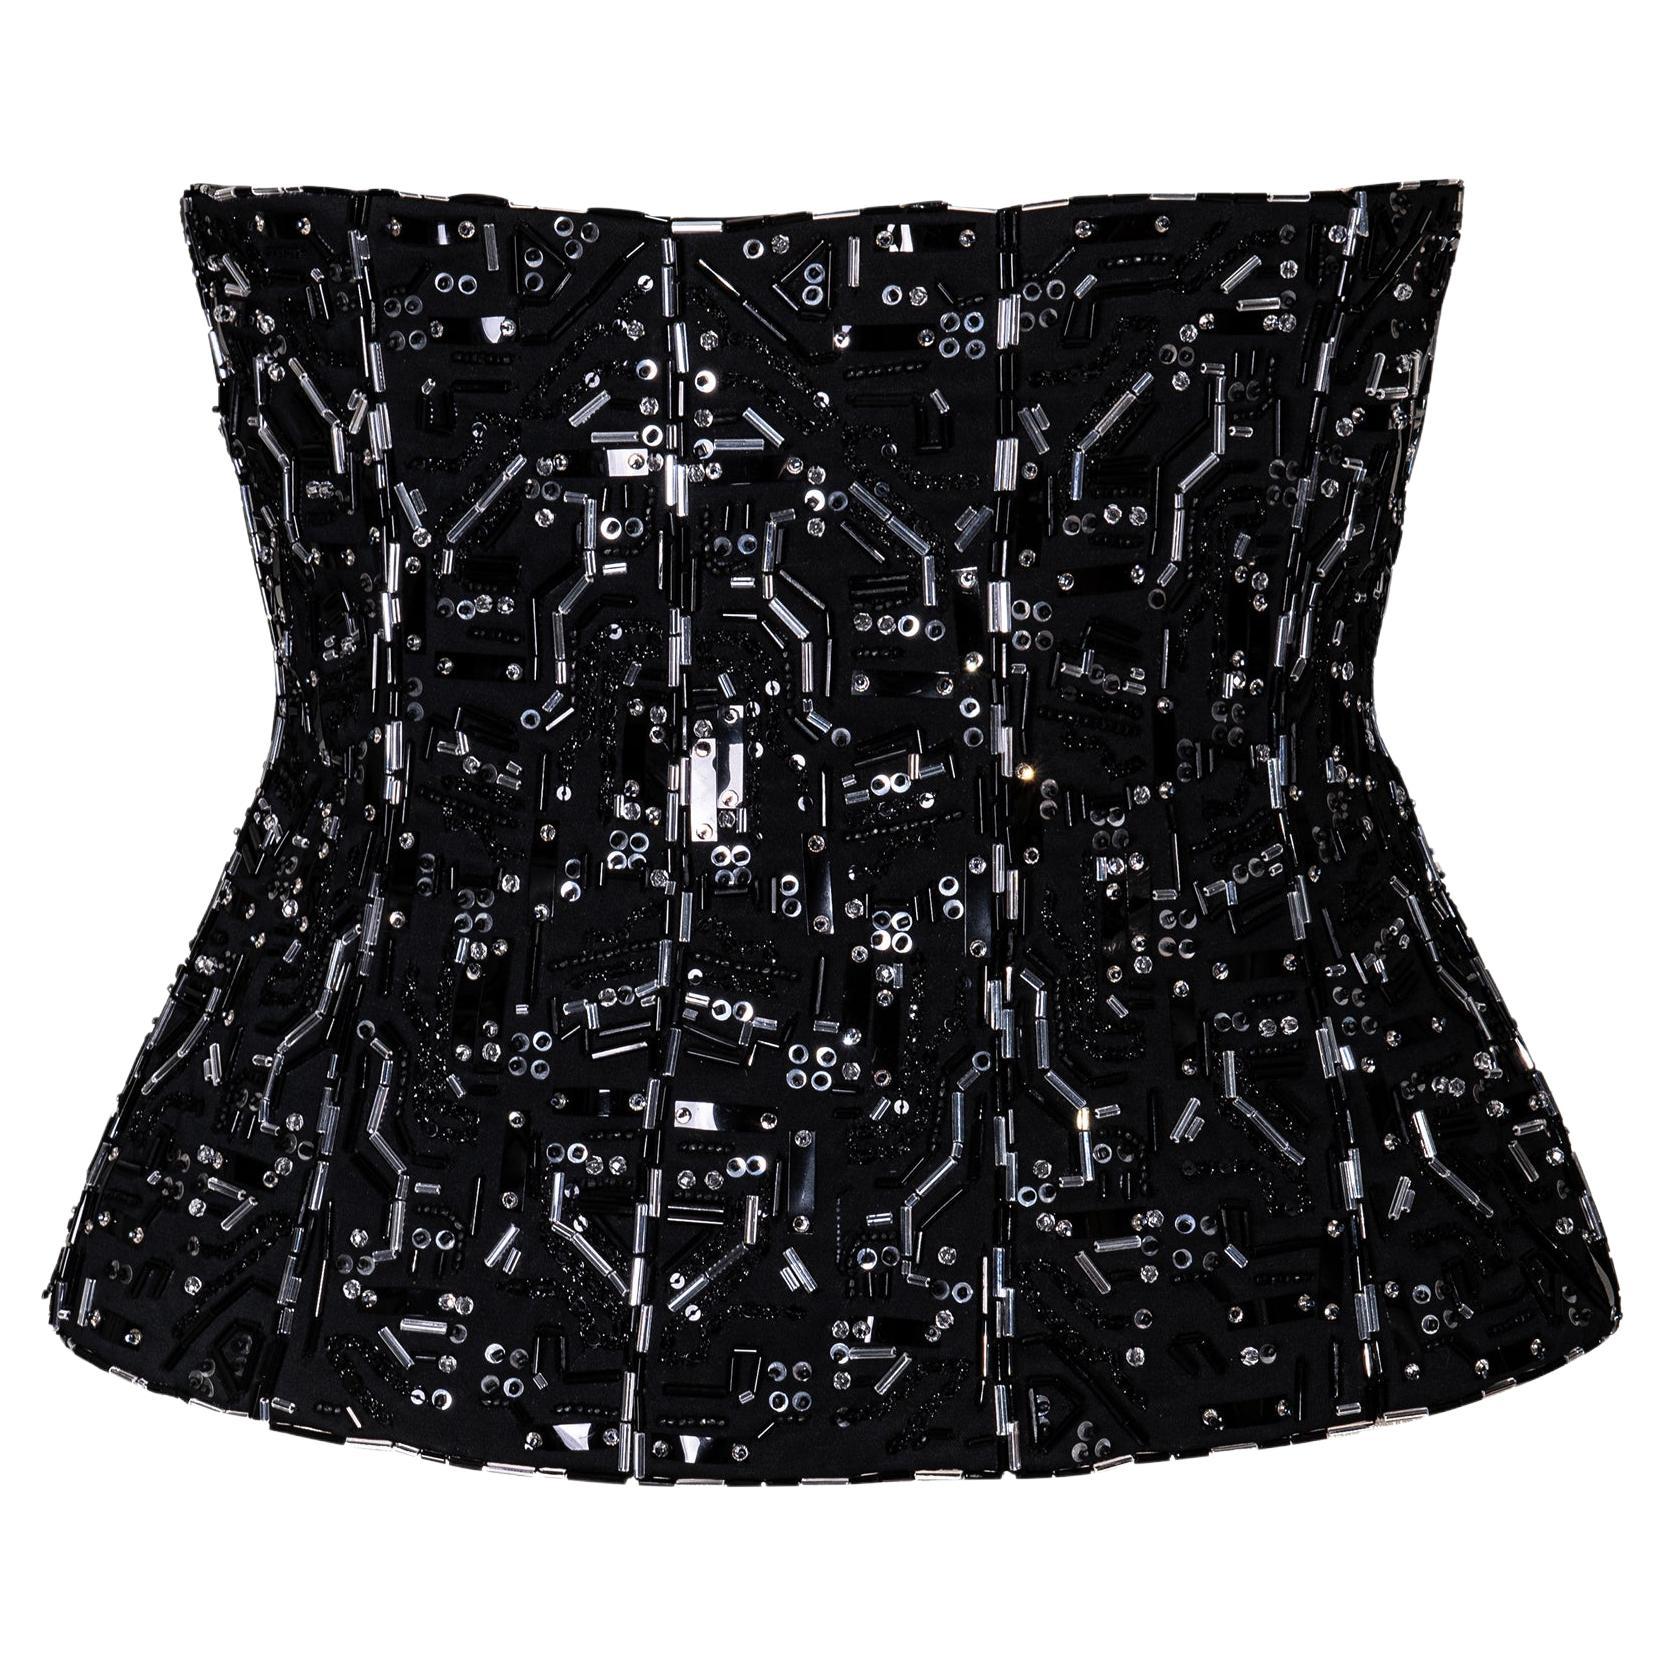 A/W 1999 Givenchy by Alexander McQueen Circuit Board Black Embellished Corset For Sale